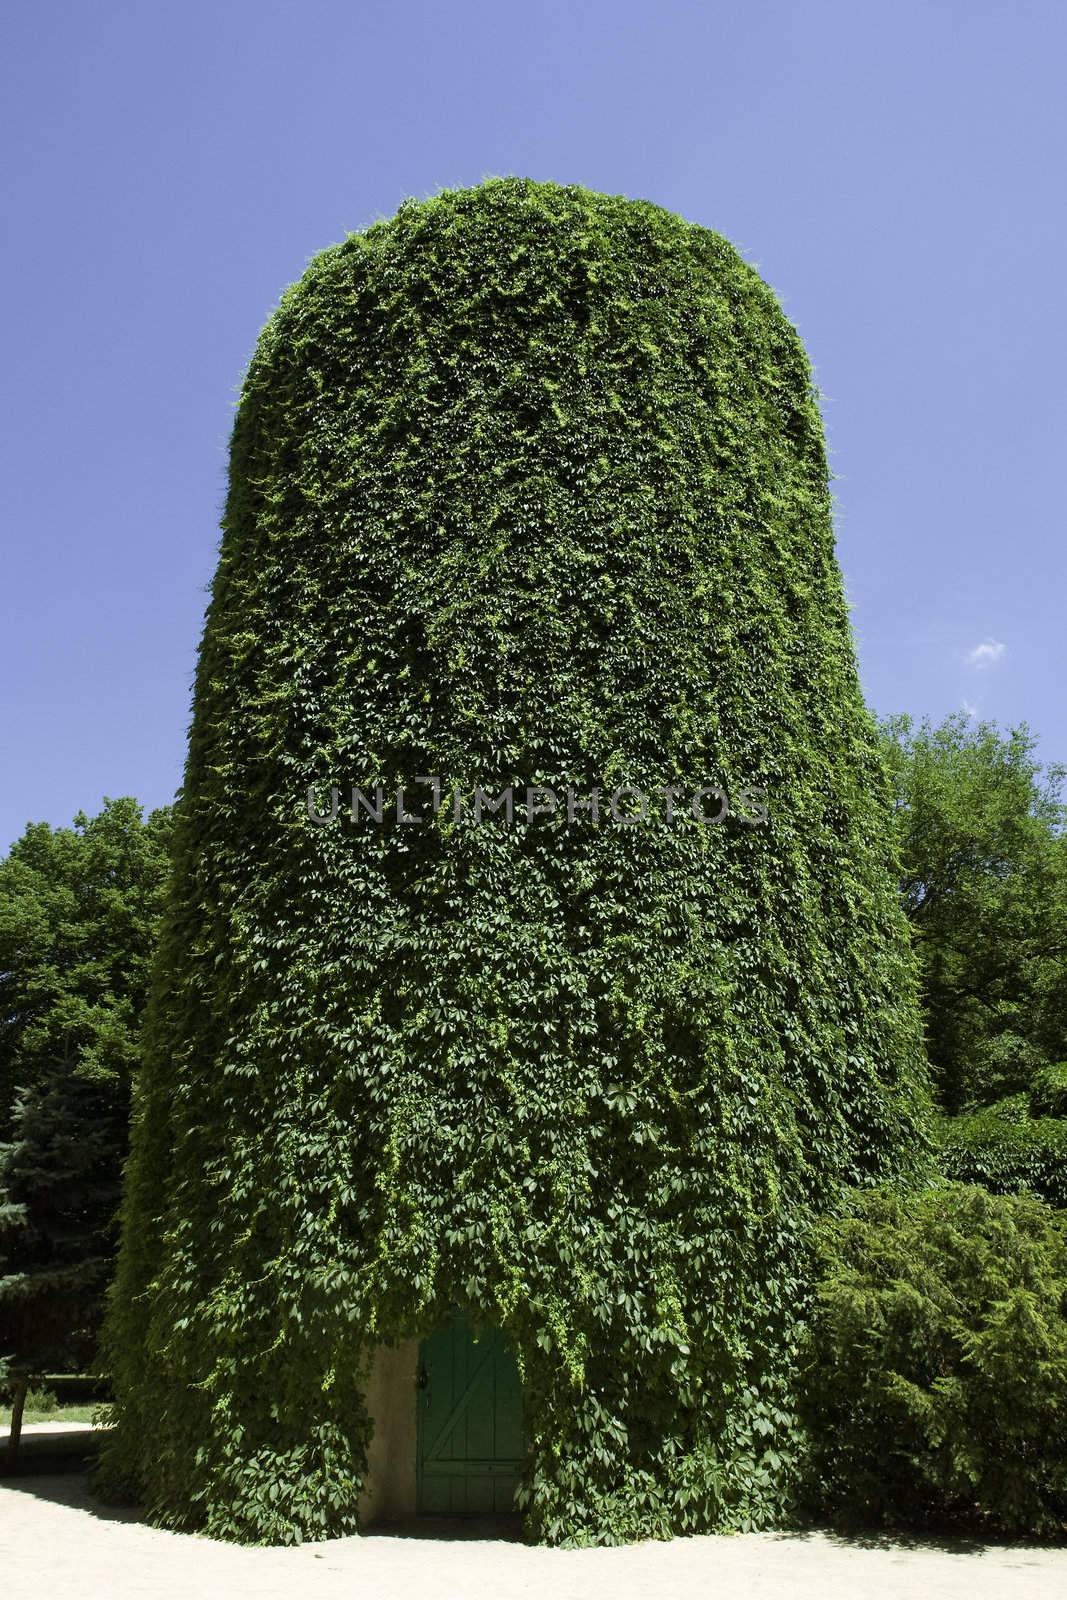 Water tower covered with green leaves